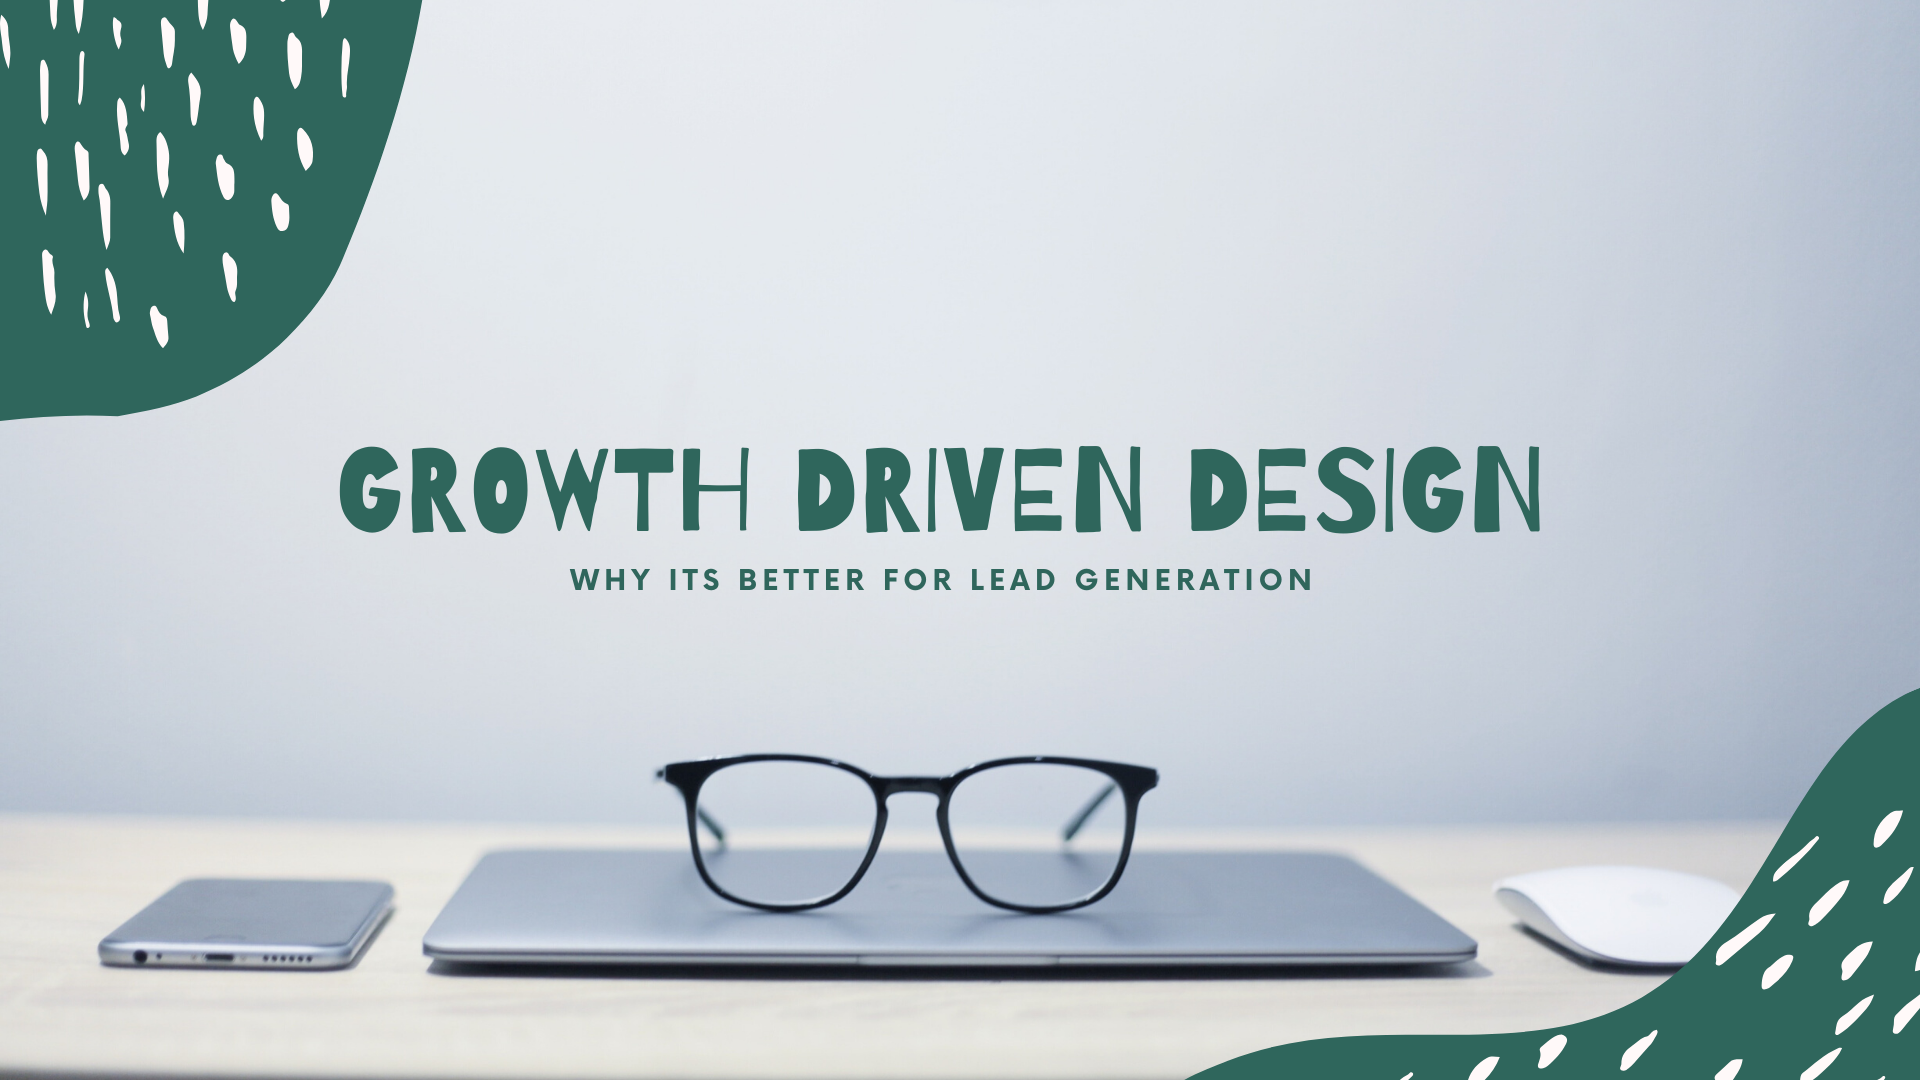 GROWTH DRIVEN DESIGN image of glasses on ipad